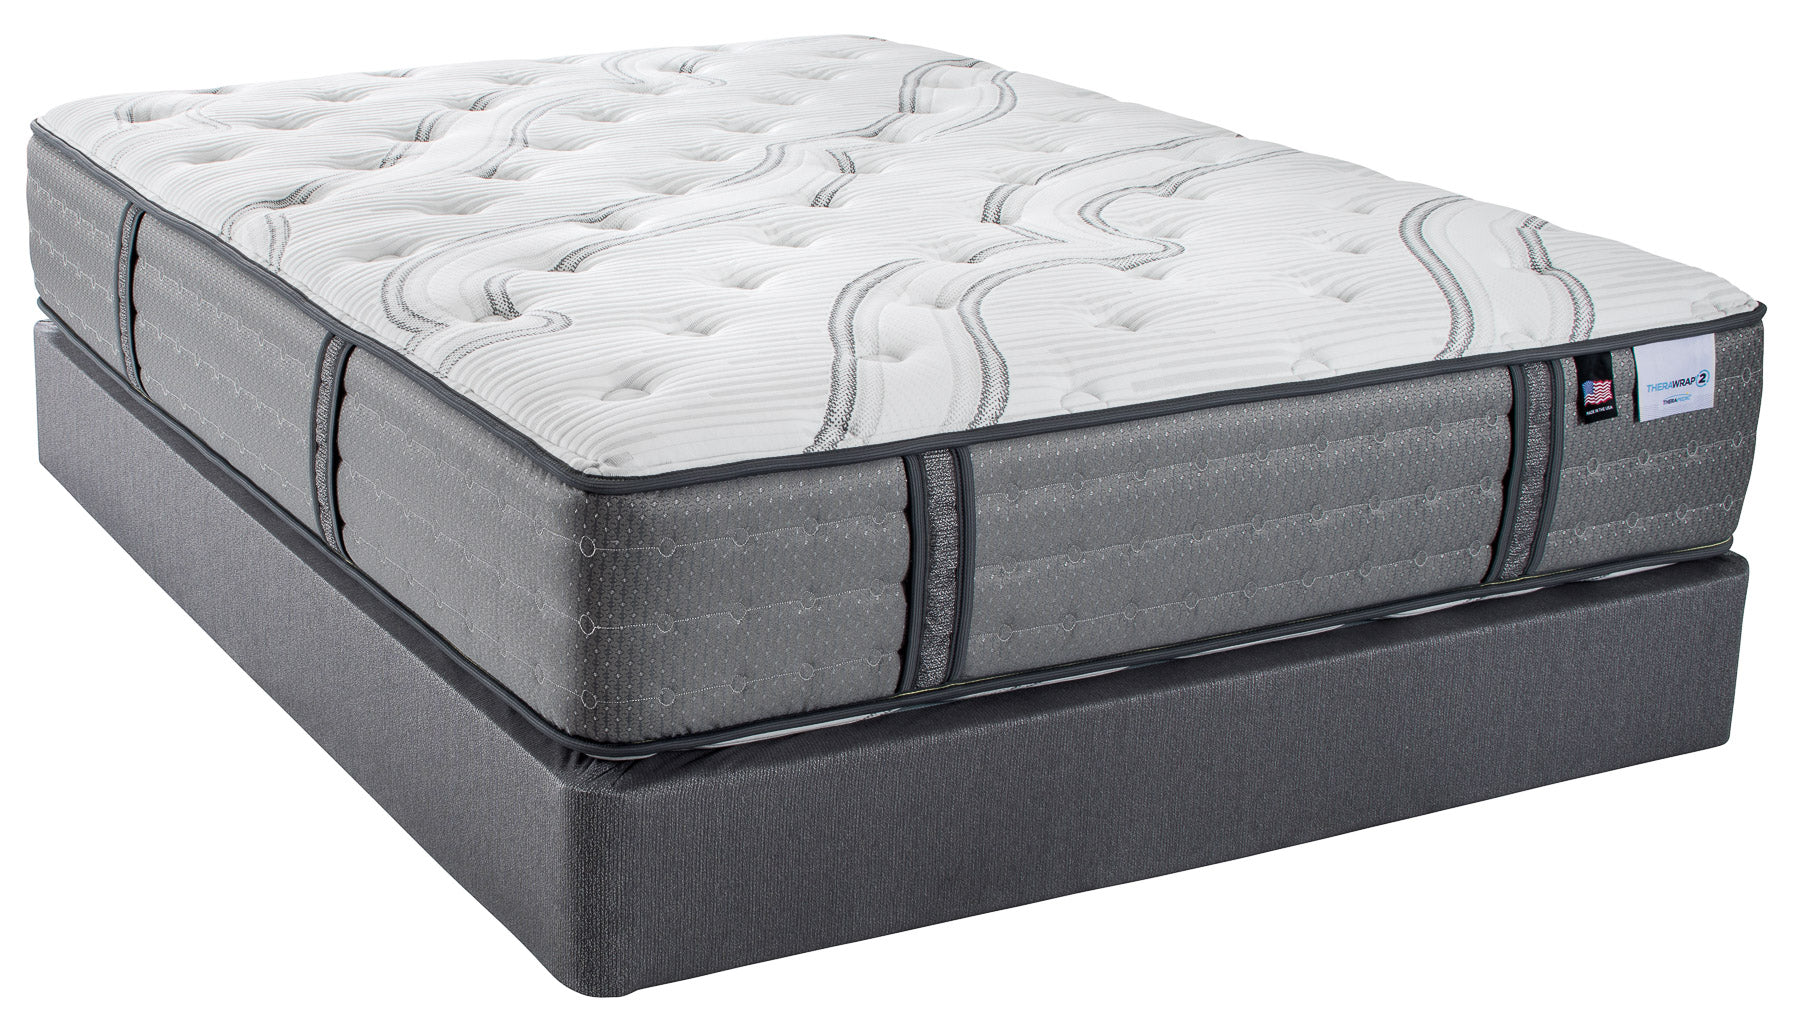 interspring twin size mattress natural products